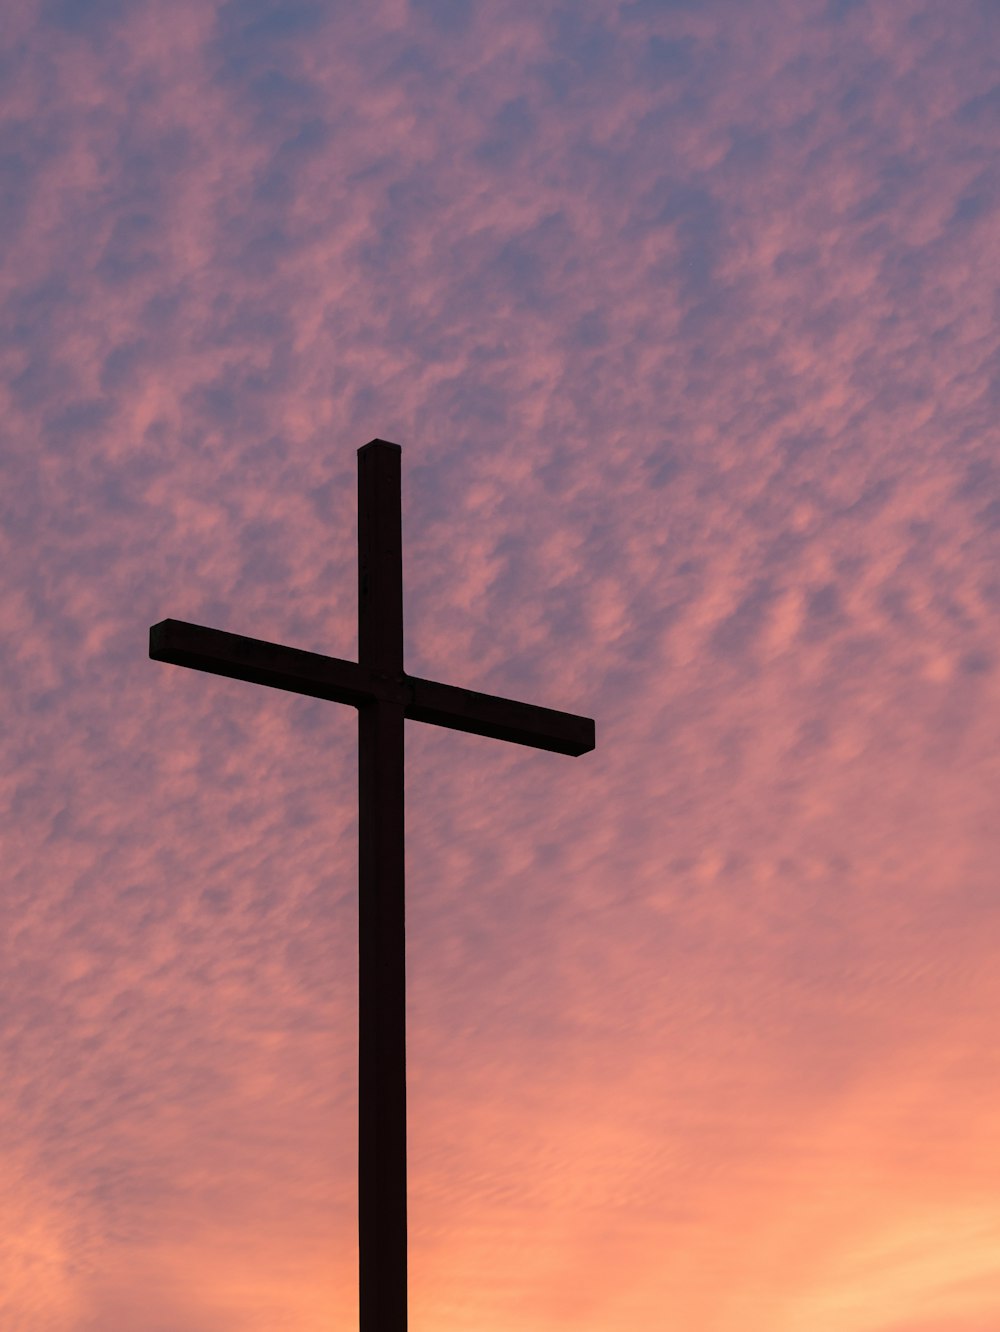 silhouette of large cross during daytime